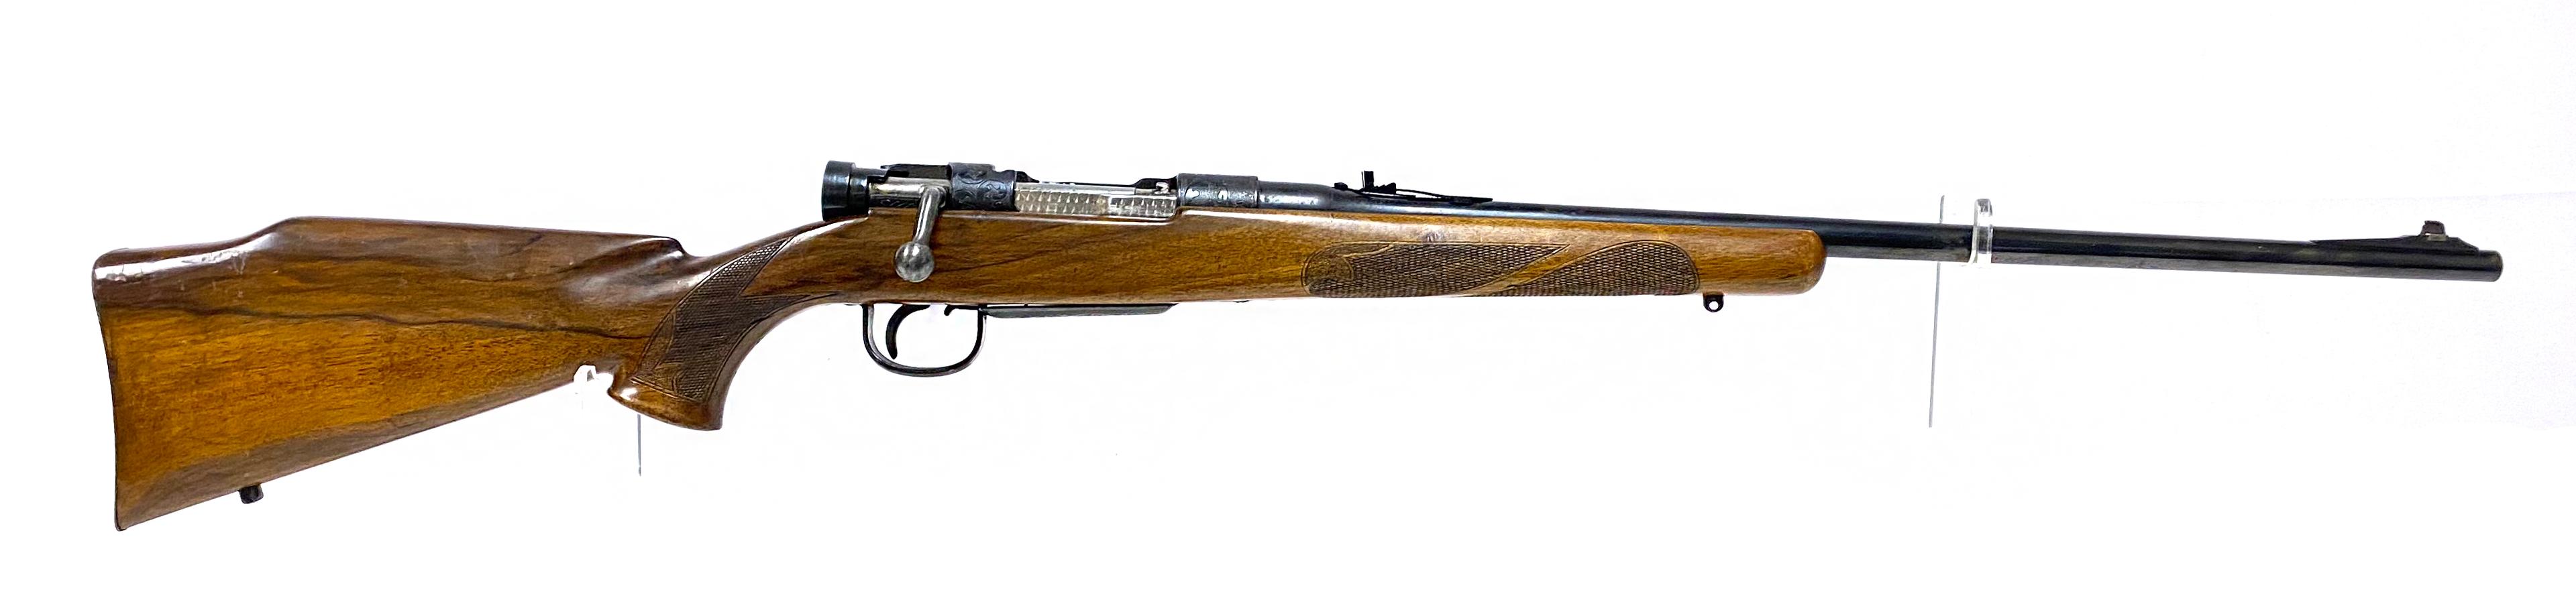 Custom Engraved Japanese Arisaka Type 99 Bolt Action Rifle with Mum in 7mm Mauser